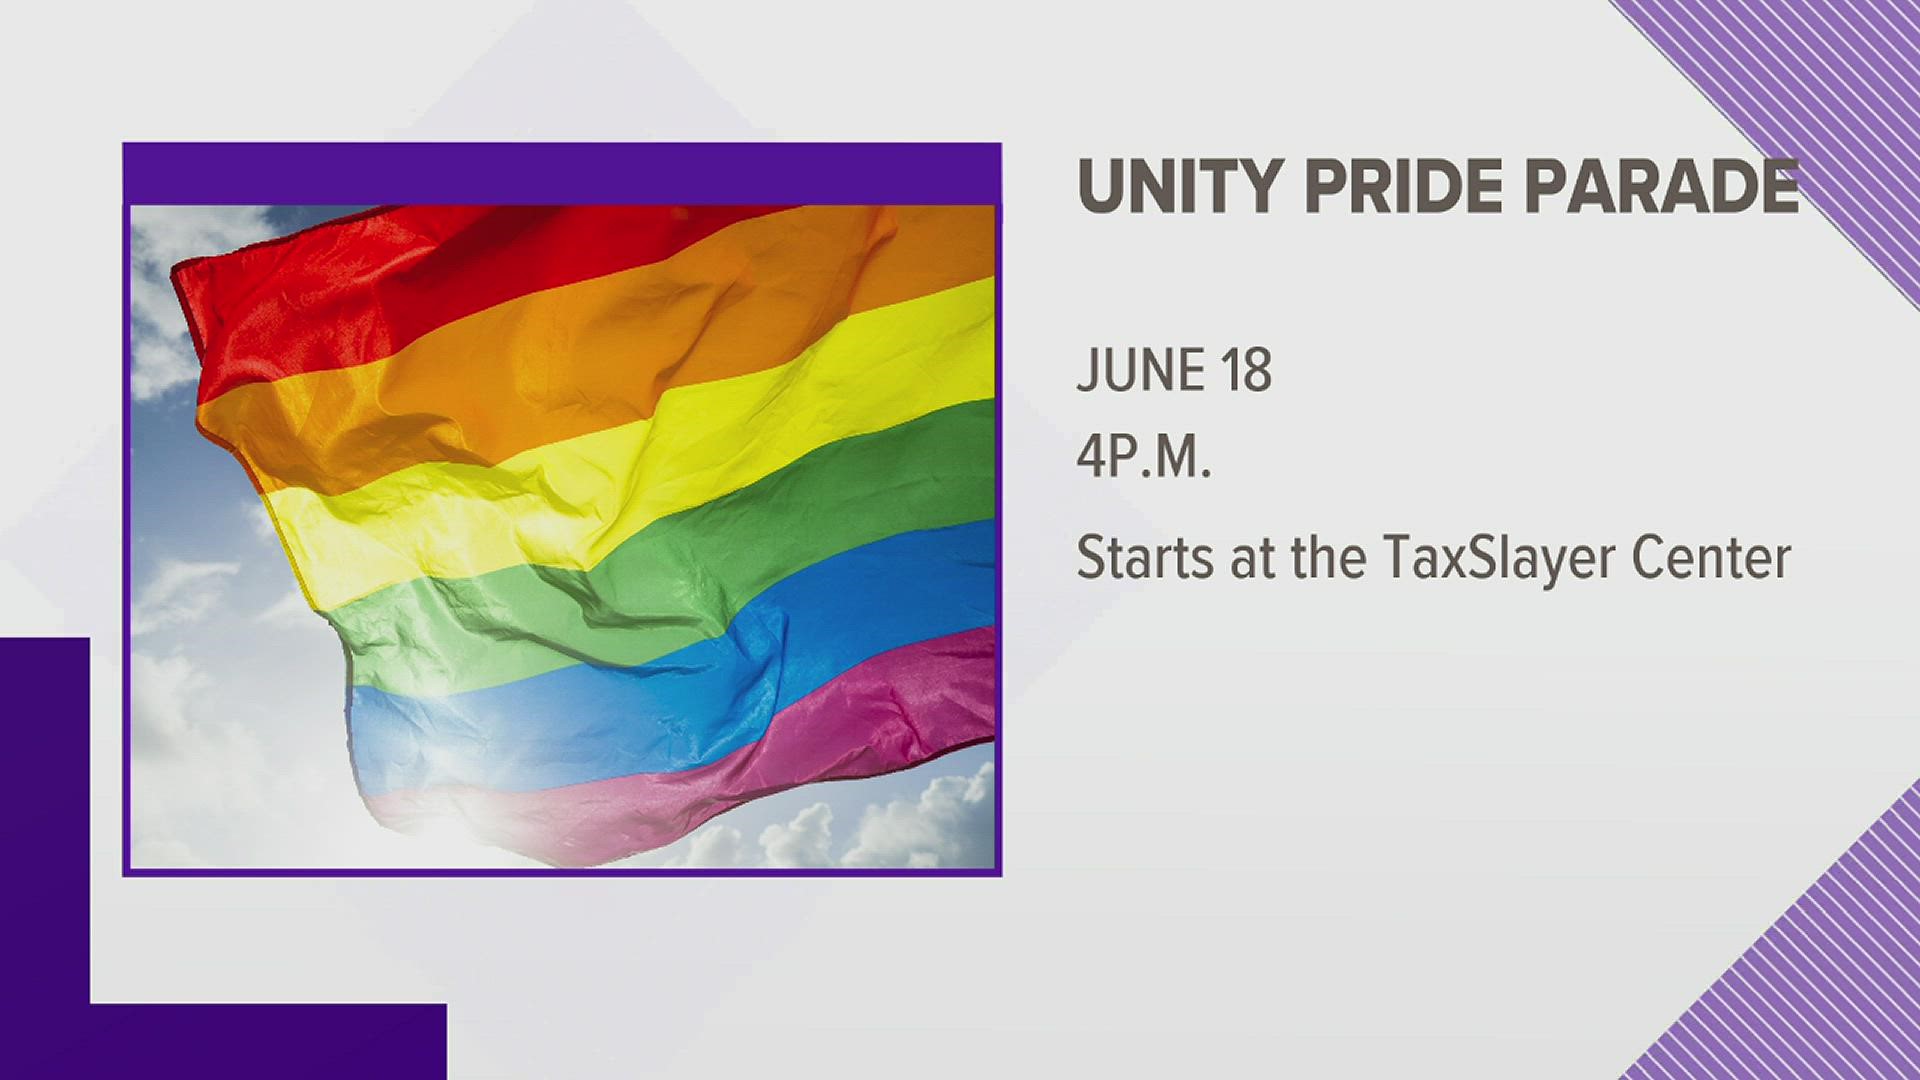 The event, hosted by QC Pride, Inc. leaves the TaxSlayer Center at 4 p.m., filling the streets with LGBTQ+ community members celebrating Pride.